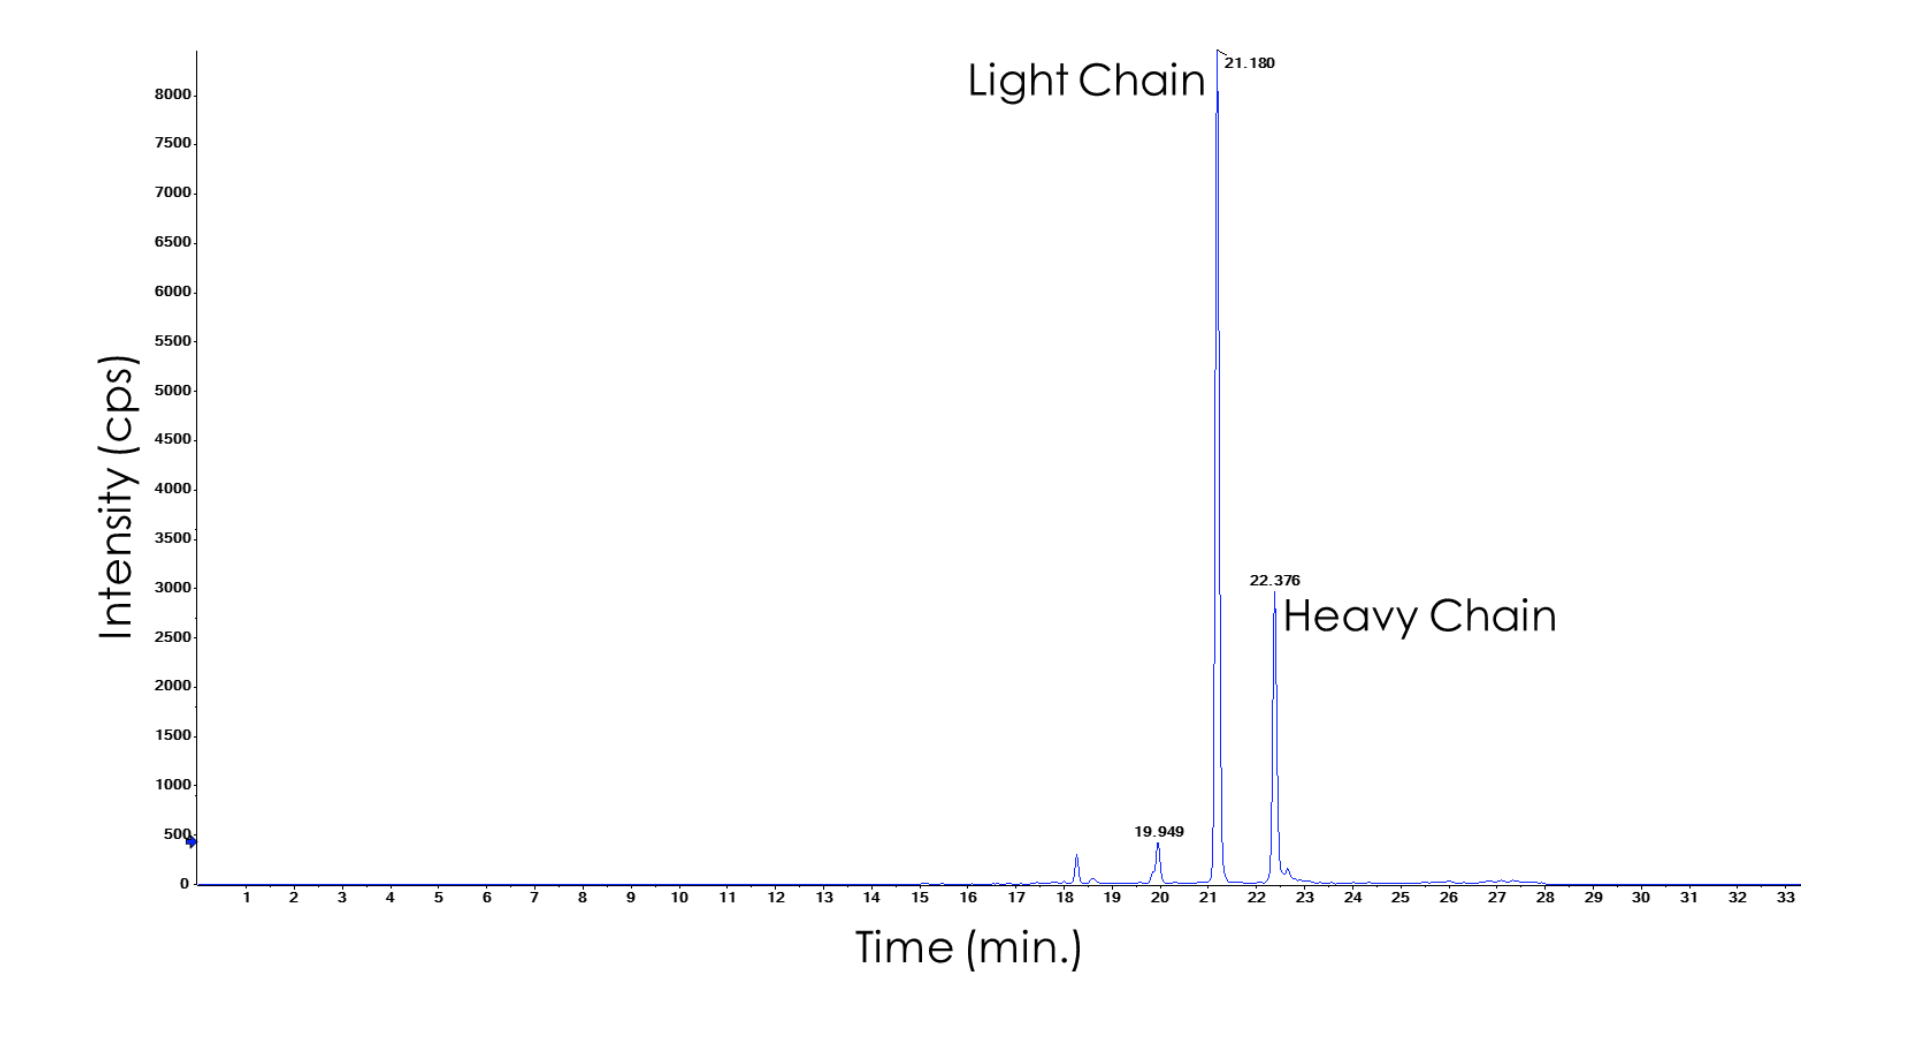 Line graph with Intensity (cps) on the y-axis from 0-8000 in increments of 500 cps and Time (min) on the x-axis from 0-33 in increments of 1 min. Sample is digested into light chain (LC) and heavy chain (HC) fragments. The high intensity peaks indicate LC and HC forms.